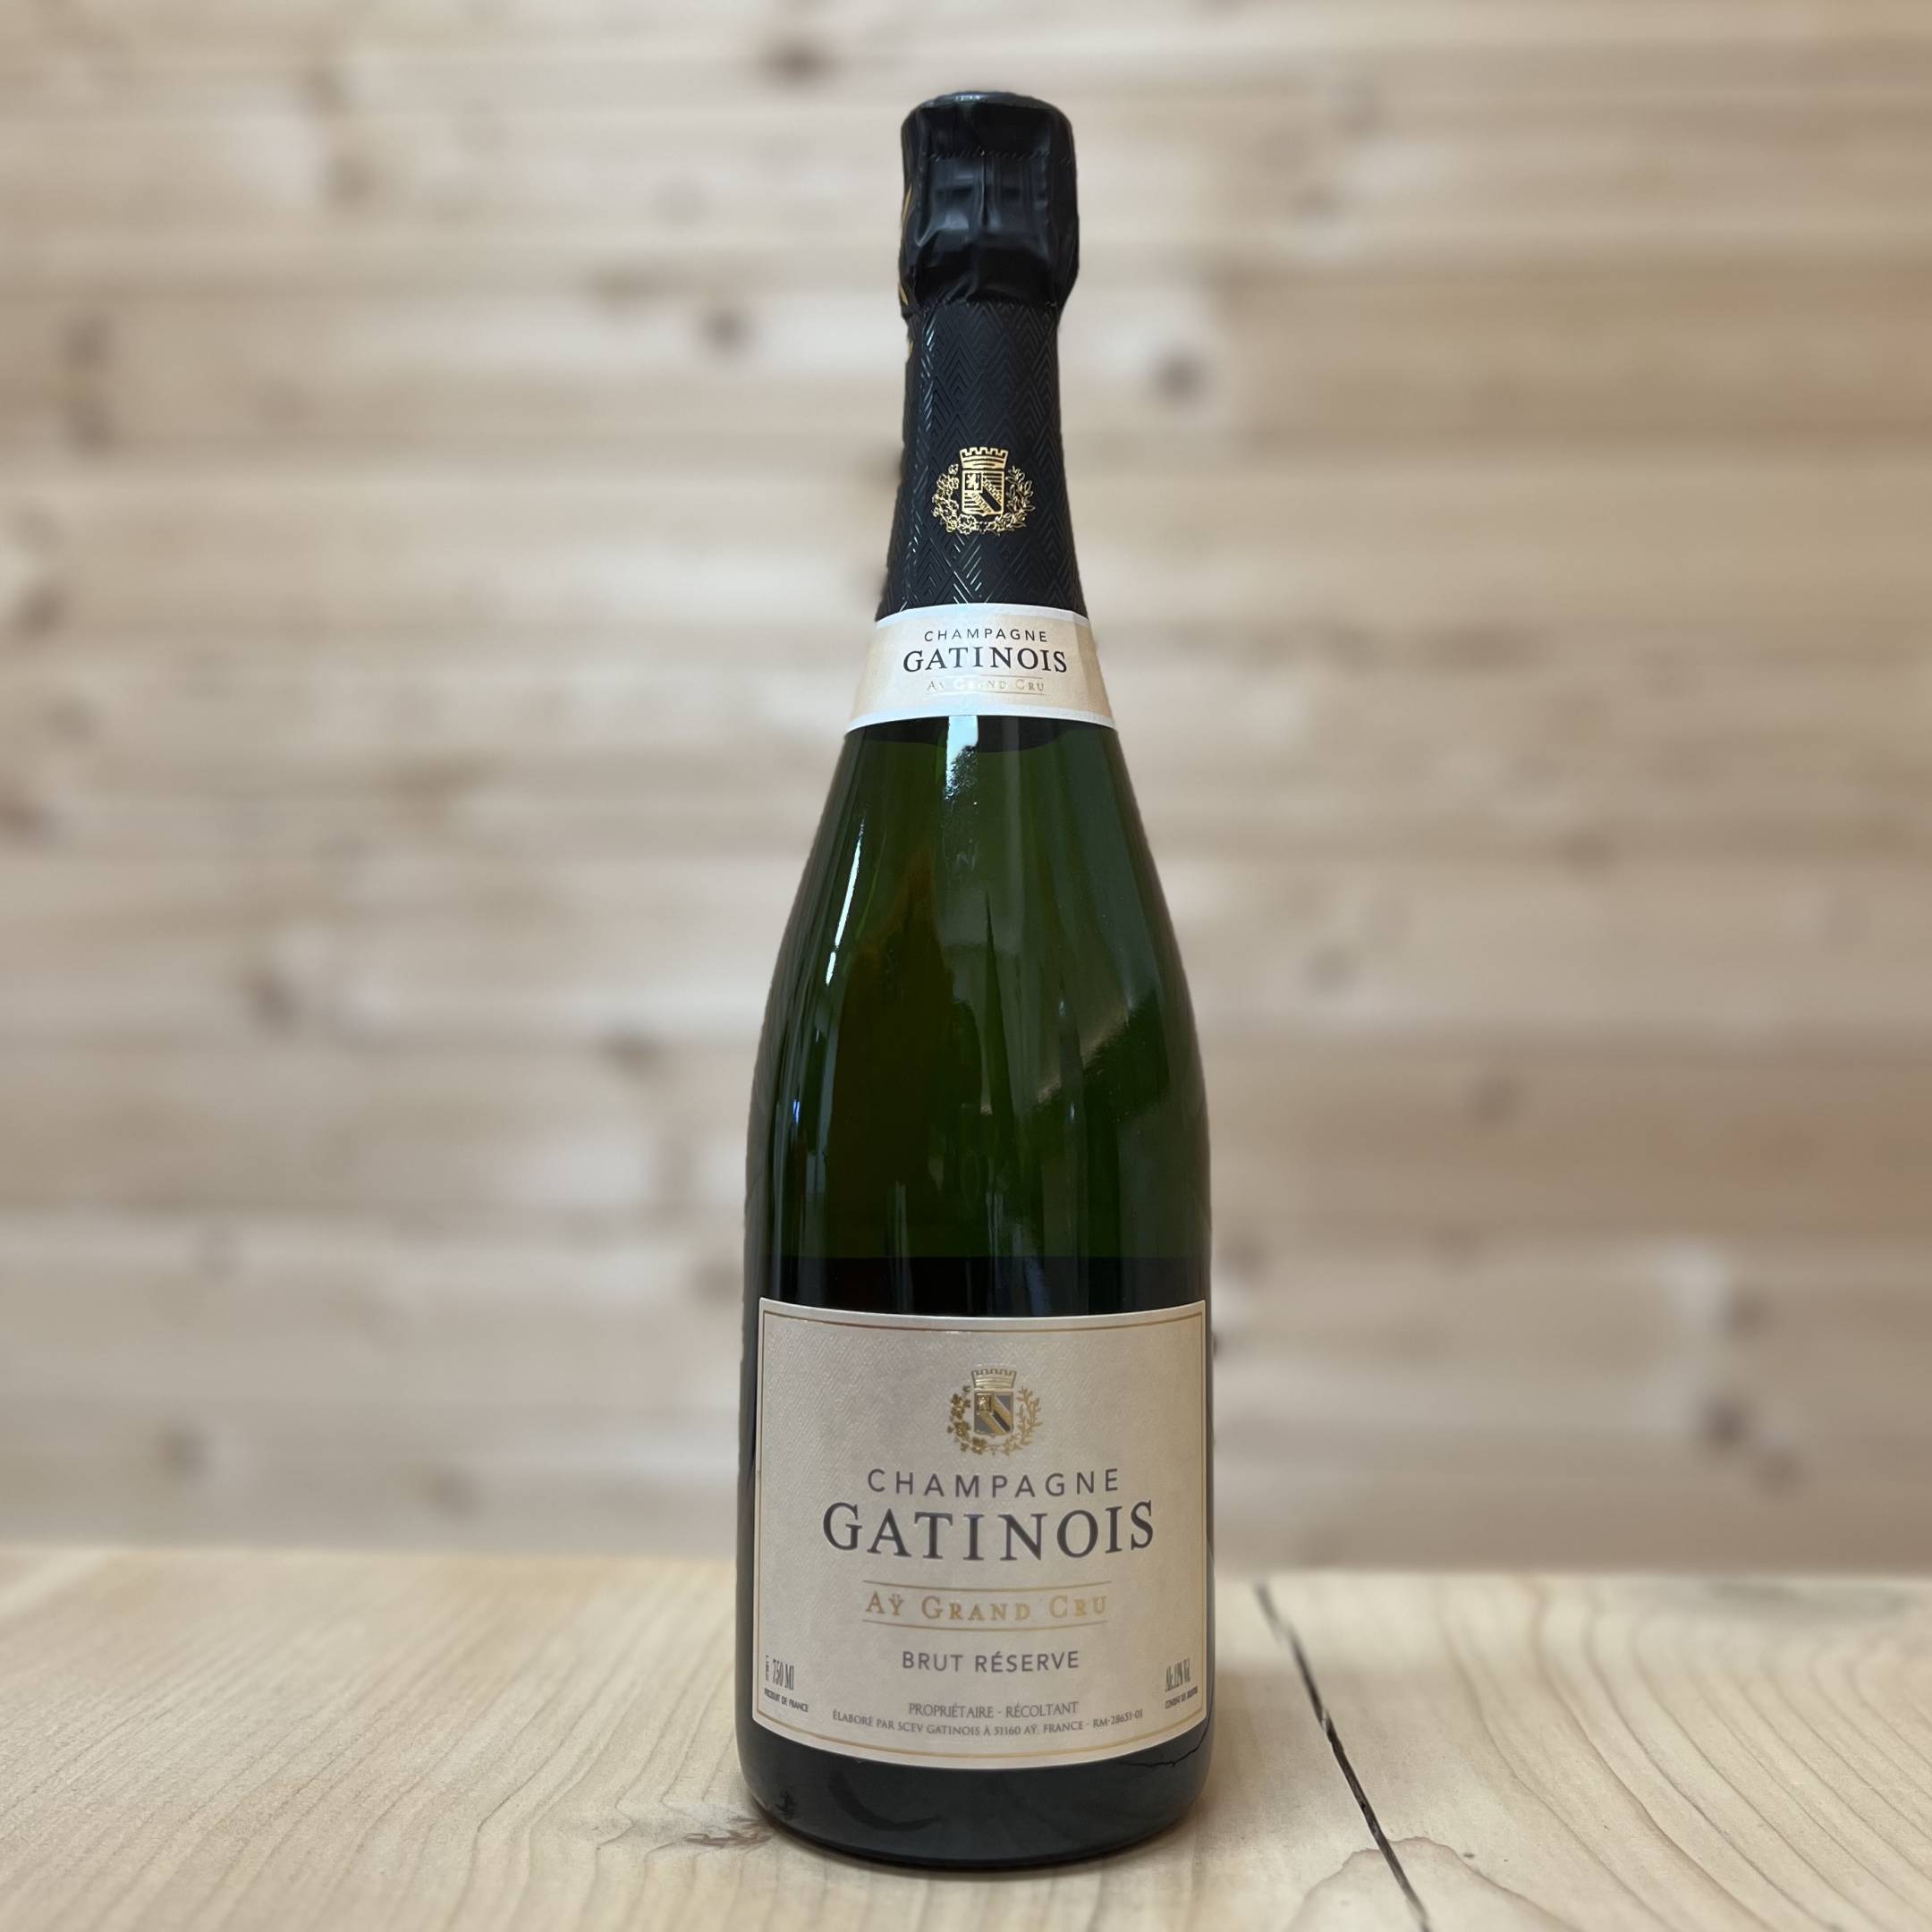 Gatinois Champagne Brut Reserve